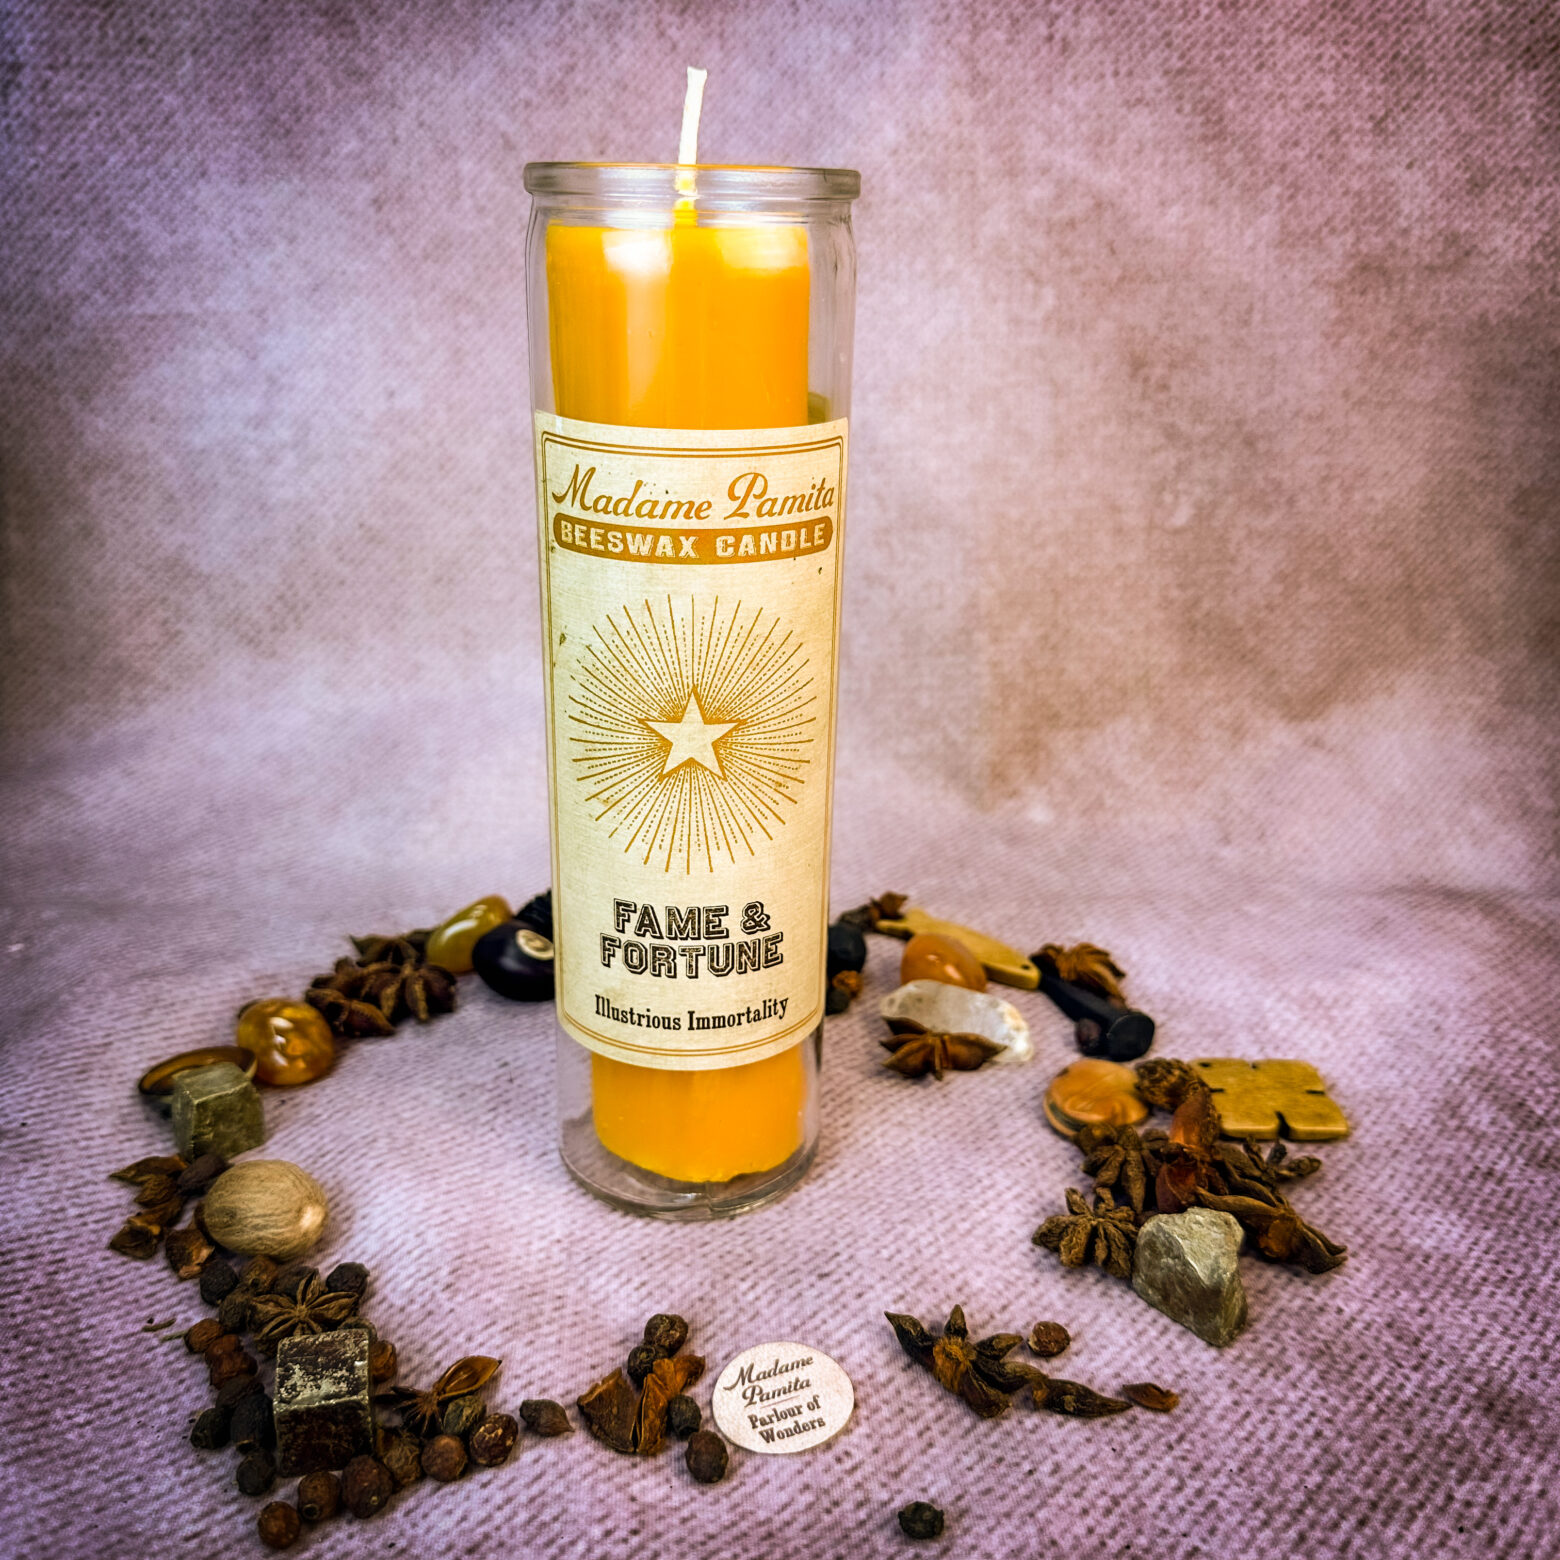 Madame Pamita Fame and Fortune Beeswax Vigil Candle